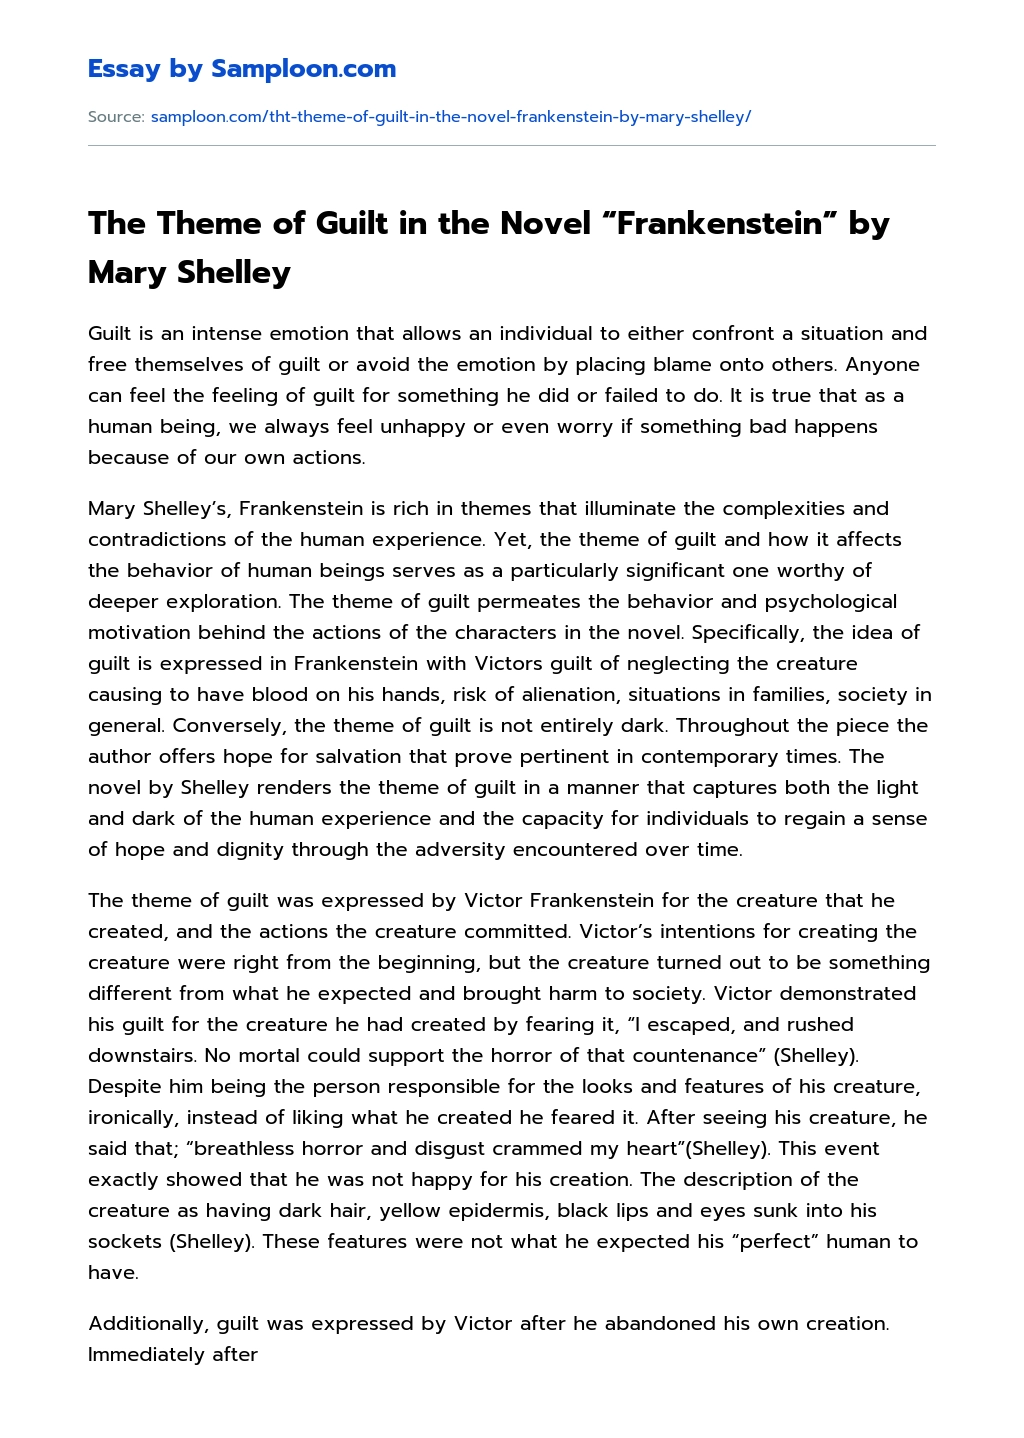 The Theme of Guilt in the Novel “Frankenstein” by Mary Shelley Analytical Essay essay